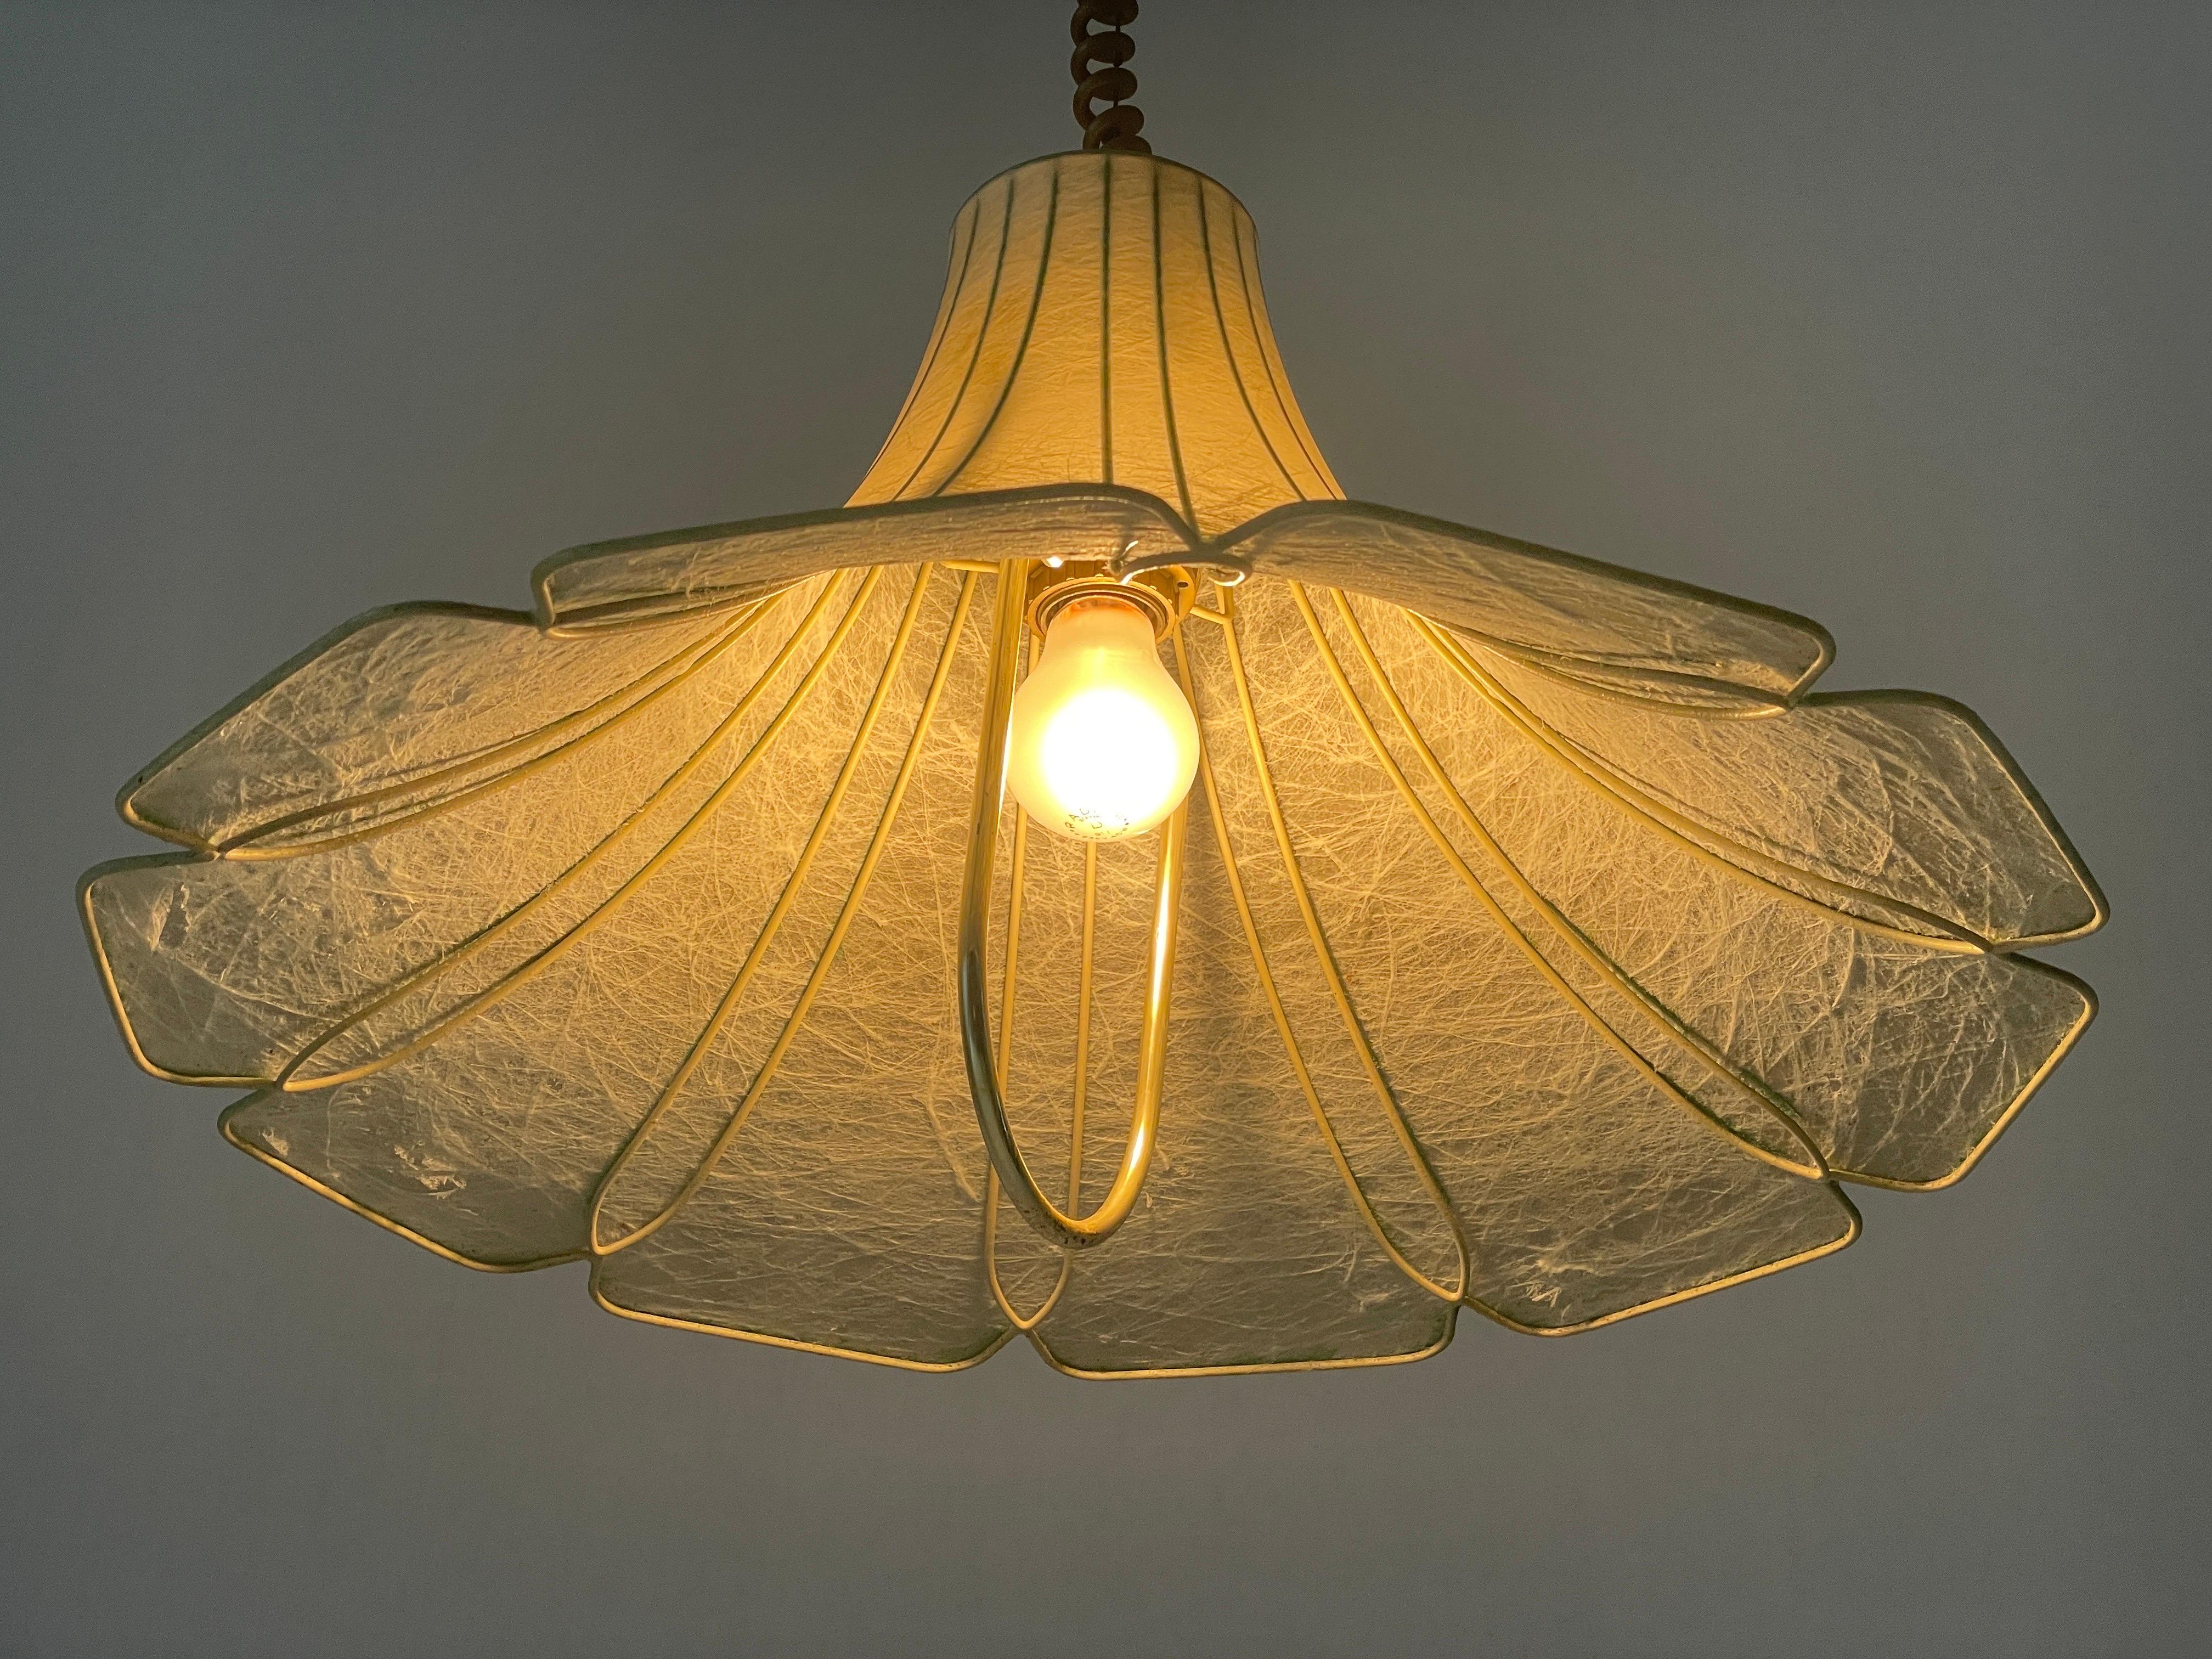 Tulip Design Cocoon Adjustable Height Pendant Lamp by Goldkant, 1960s, Germany For Sale 4